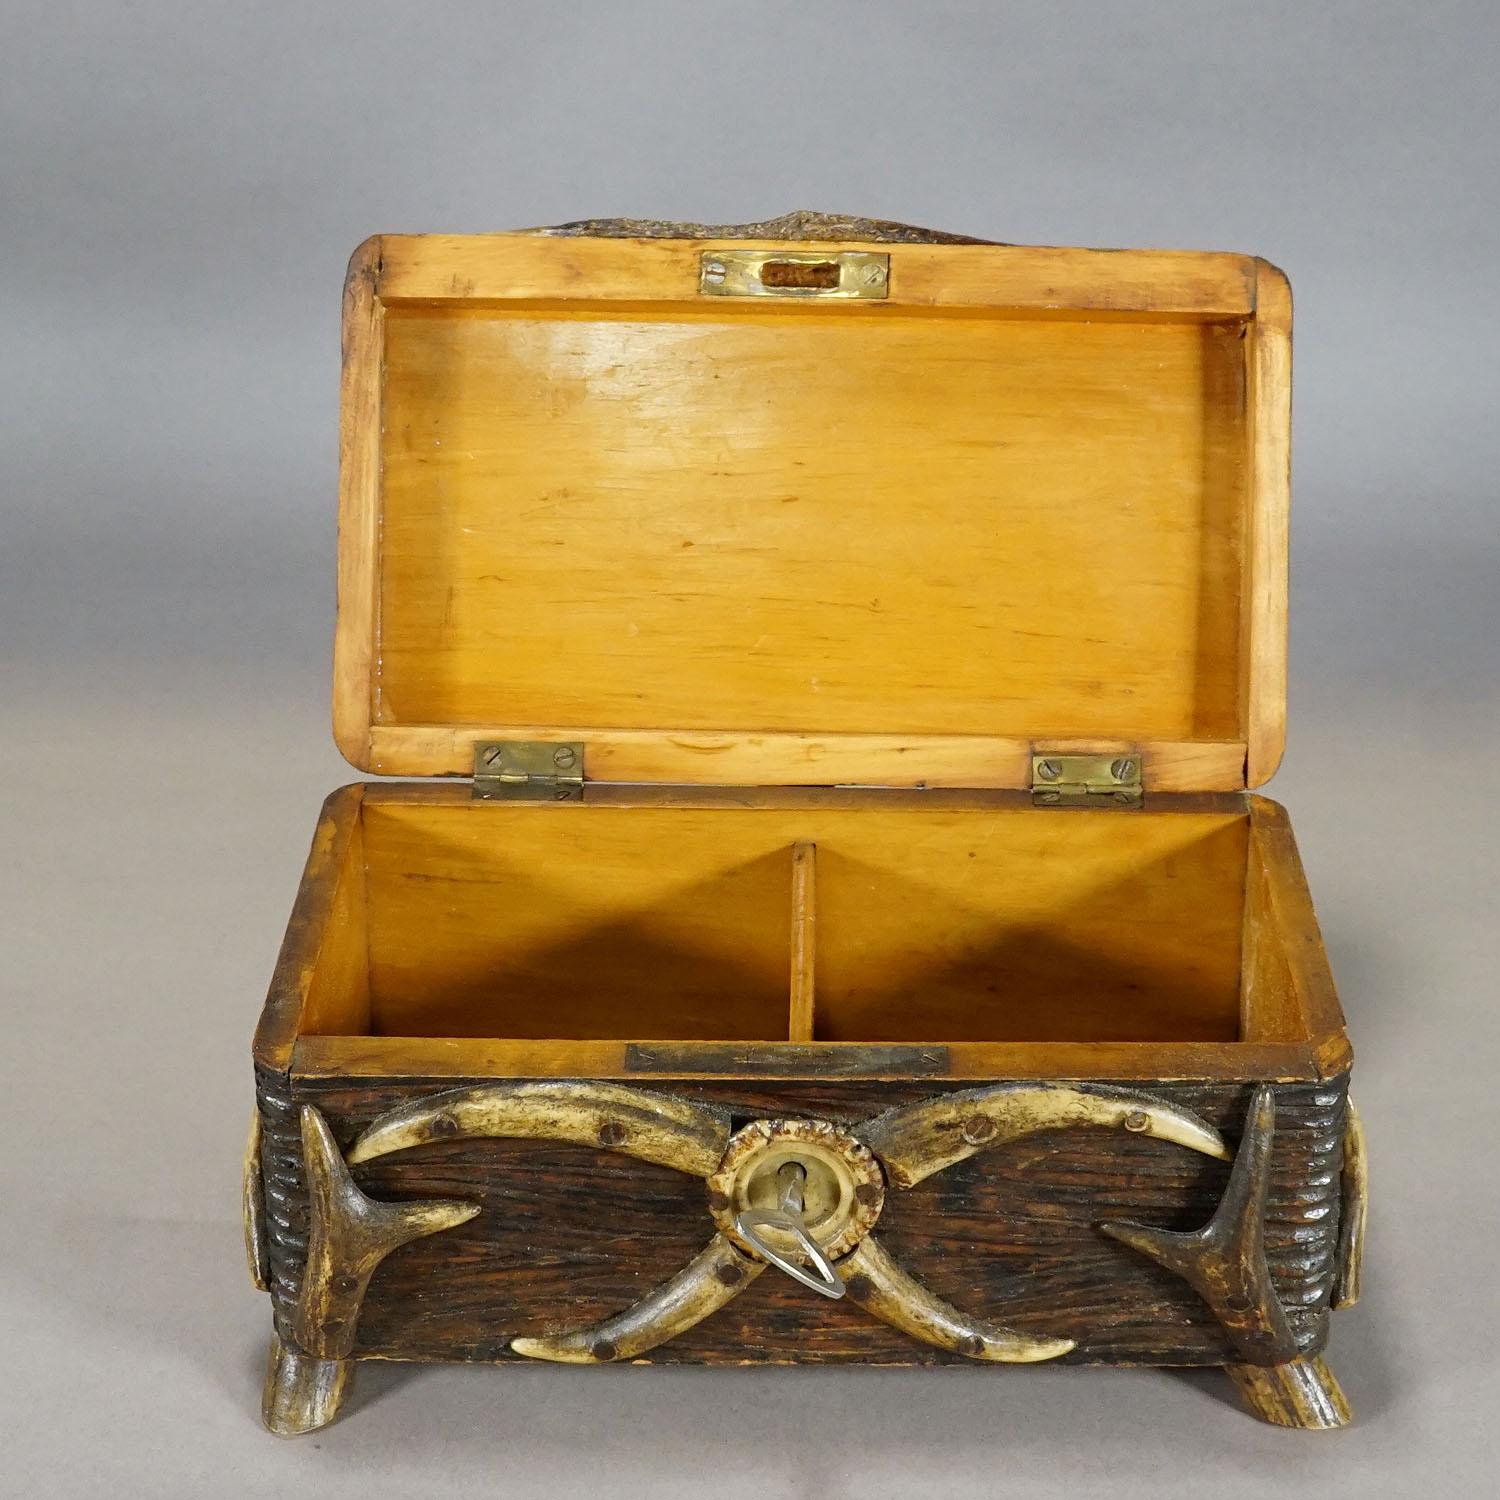 Antique Black Forest Casket with Antlers Decoration circa 1900s 1